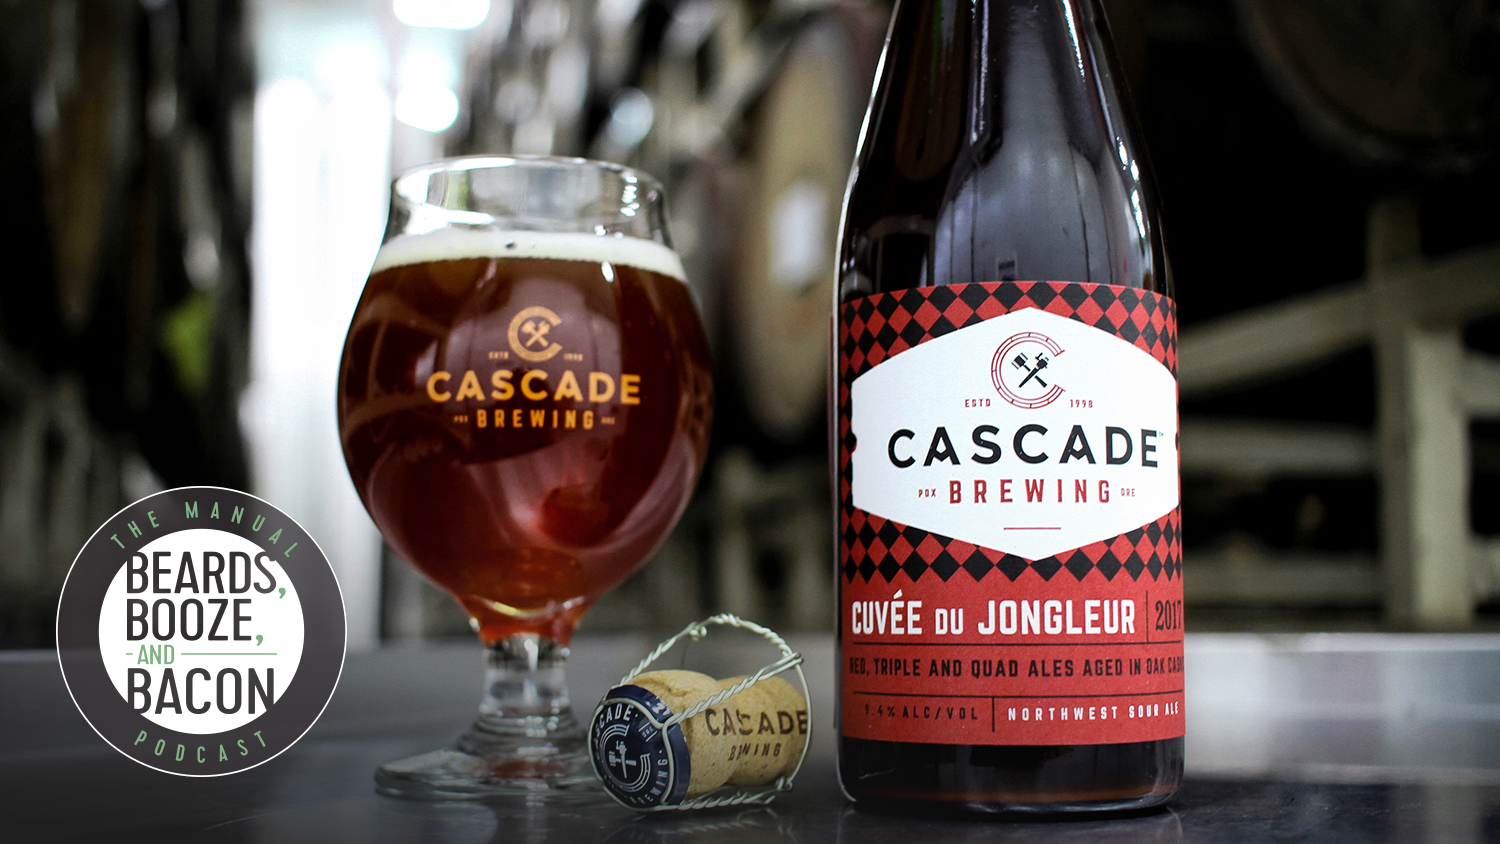 beards booze bacon sour beer cascade brewing the manual podcast beers episode